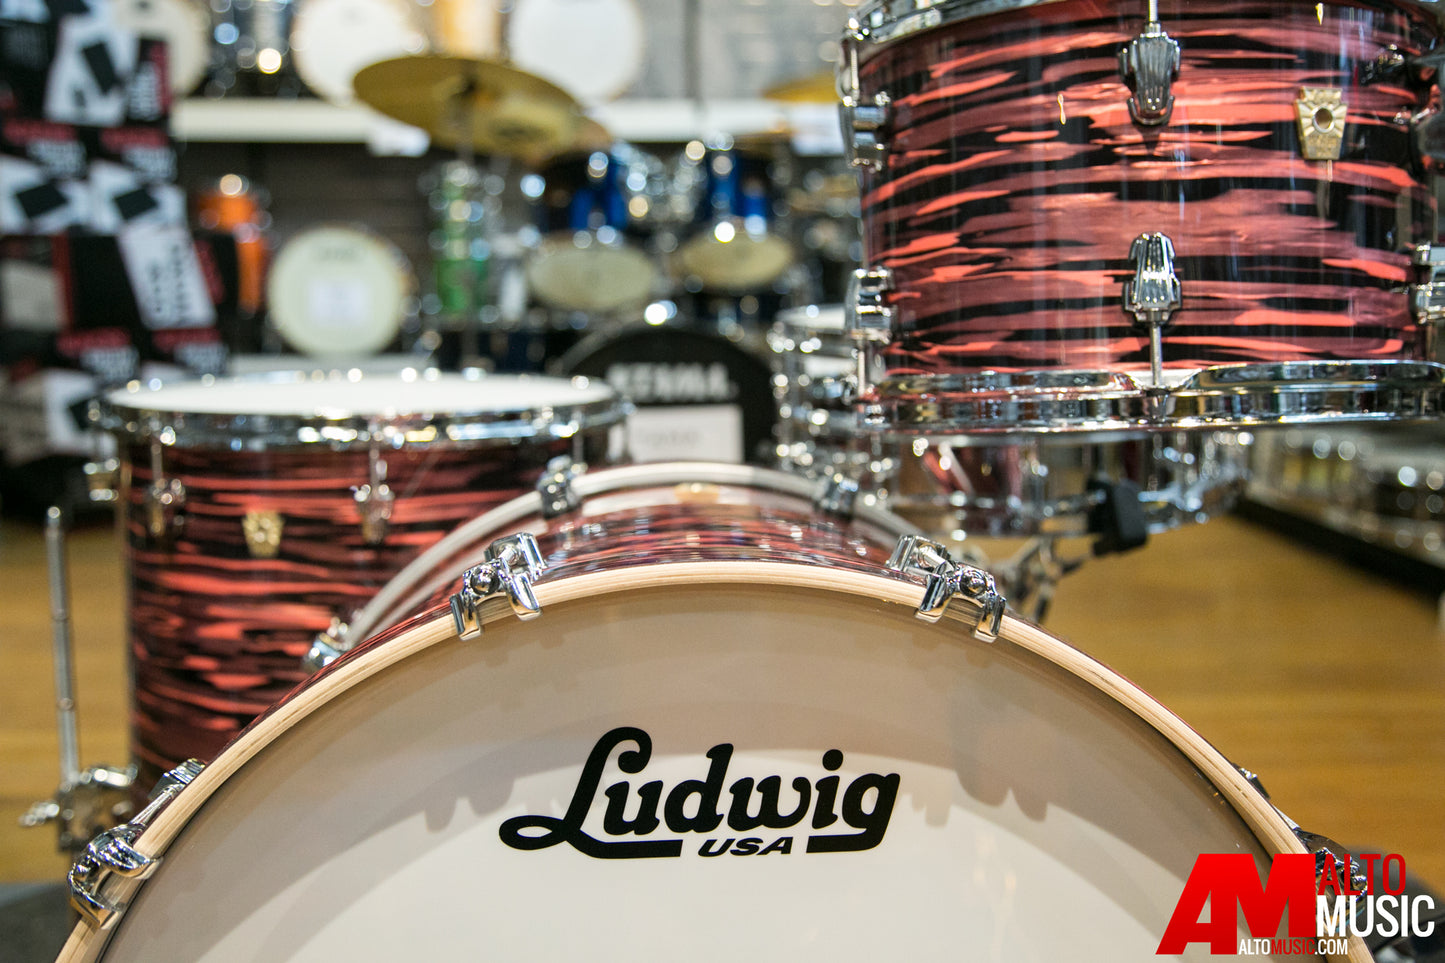 Ludwig Keystone Series Shell Kit In Salmon Oyster w/ FREE SNARE DRUM! LK7323KXSO